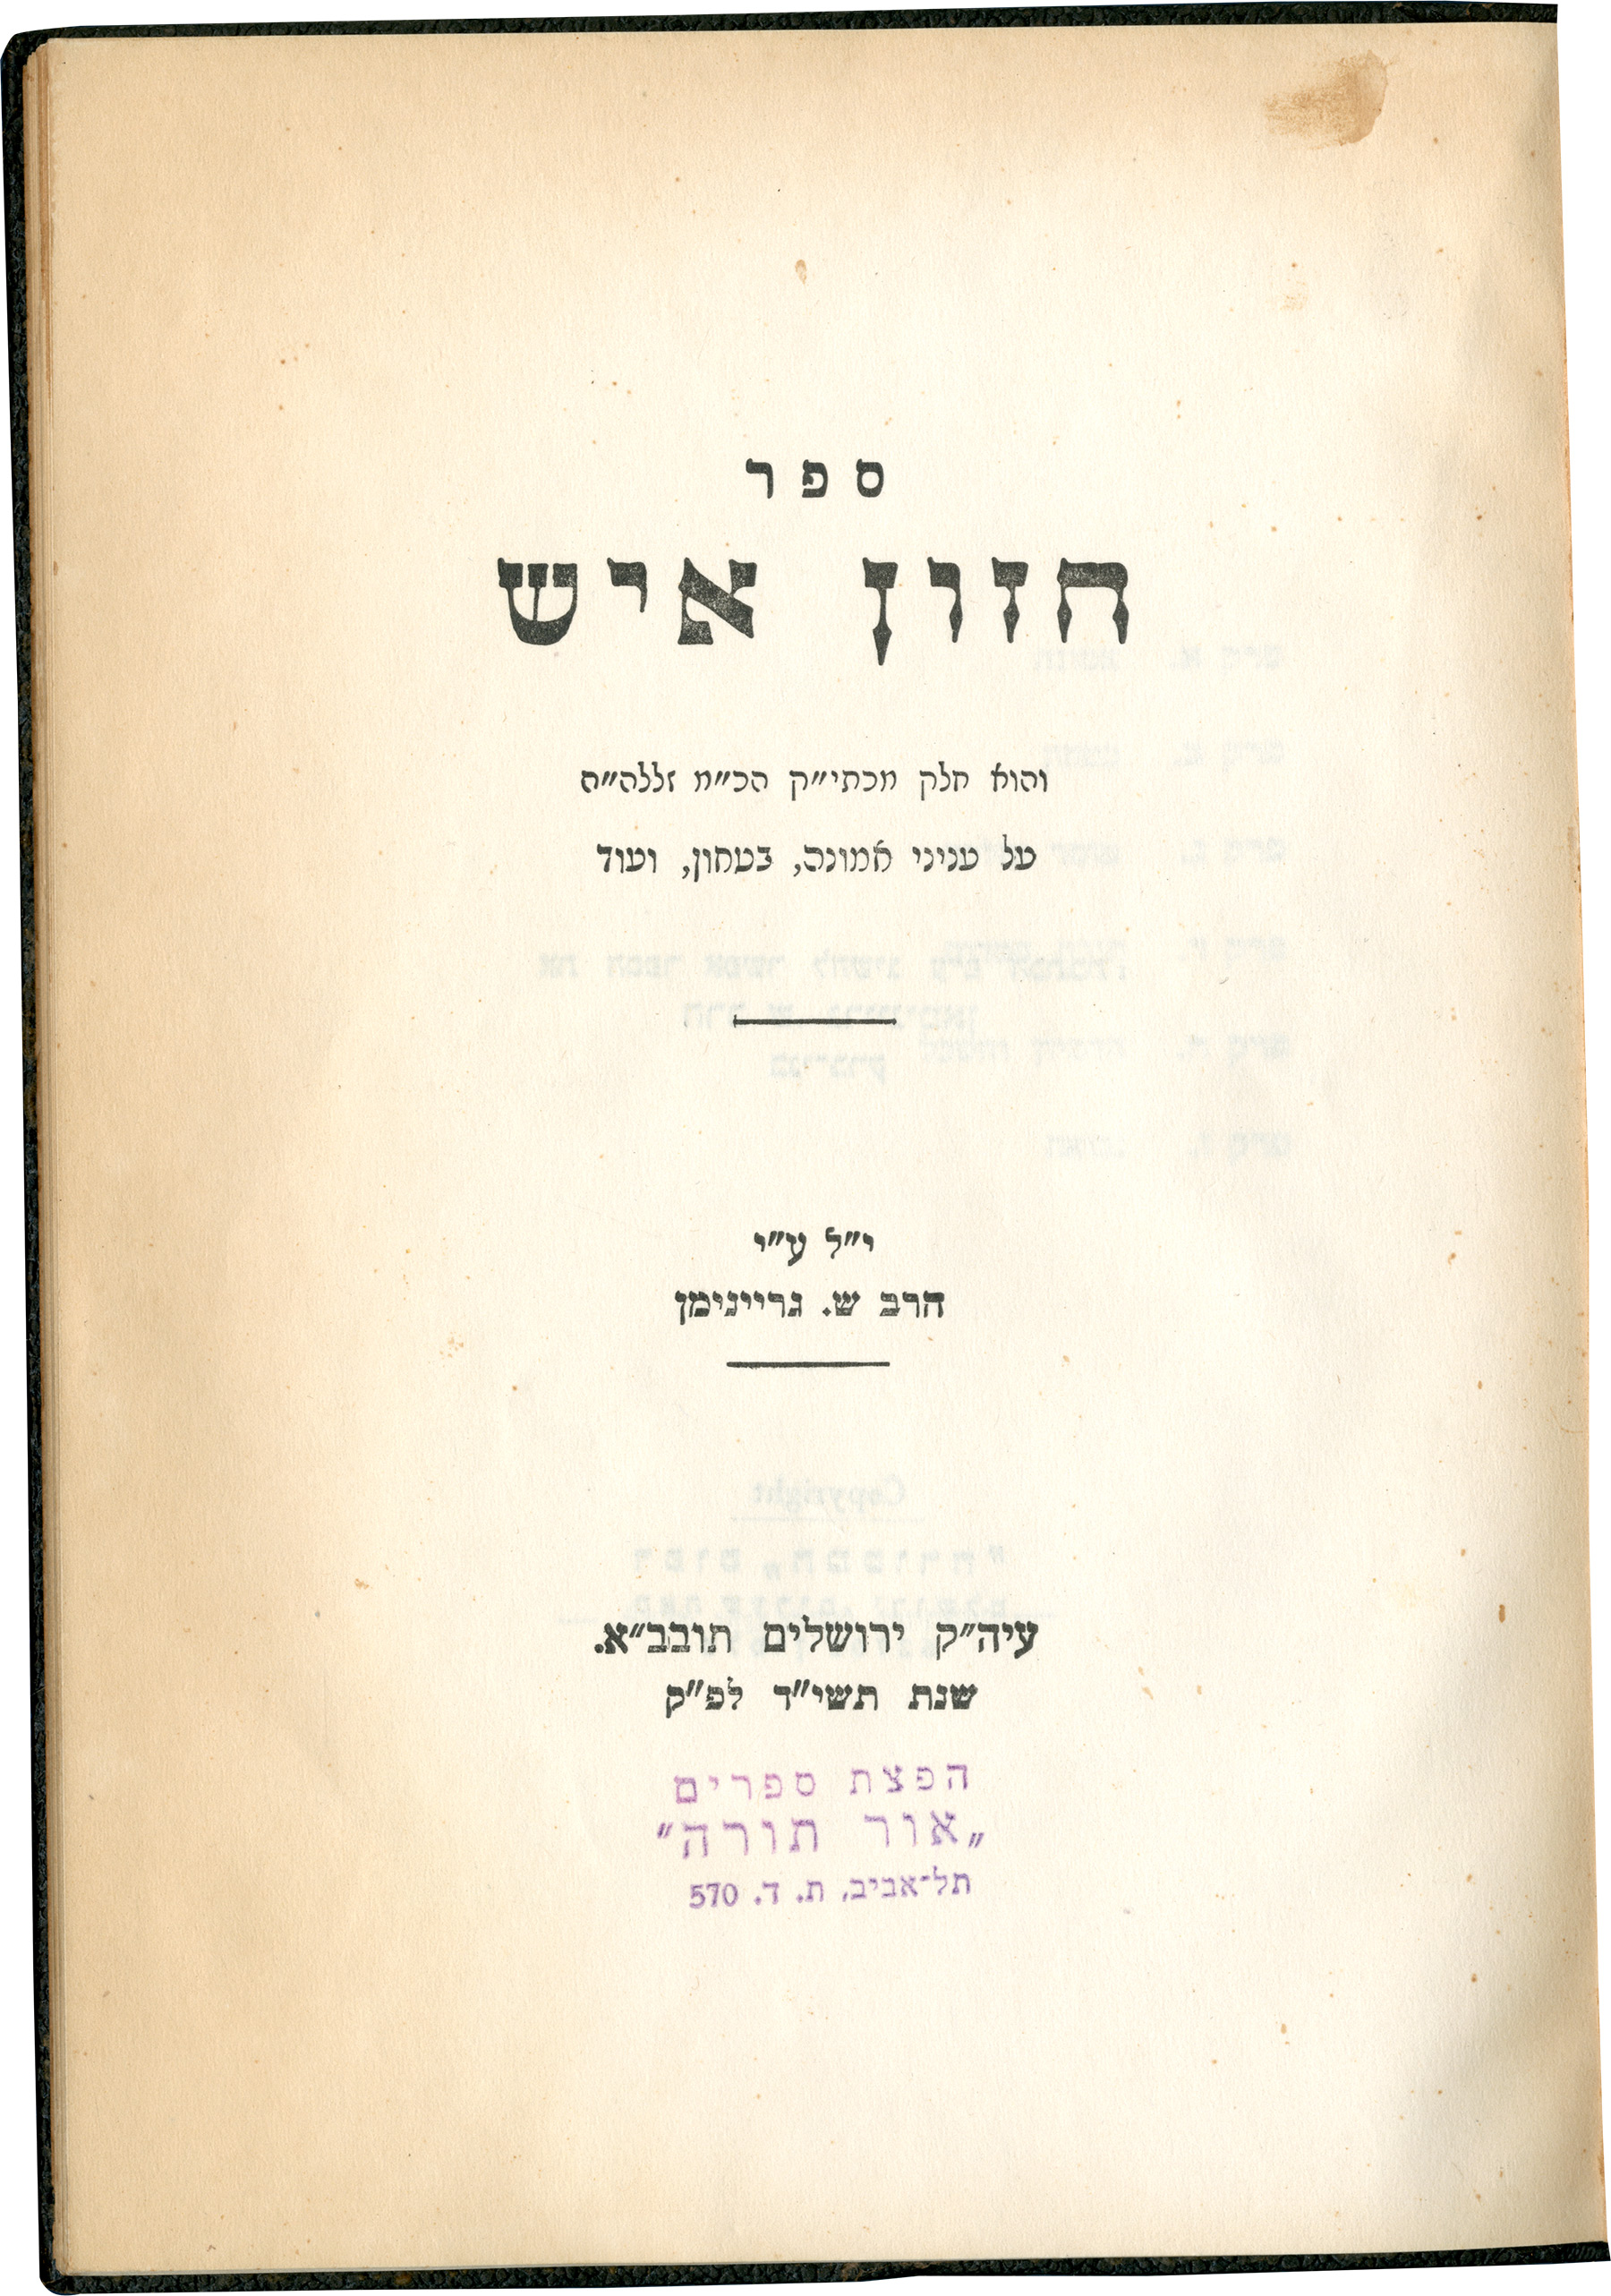 Copy of the title page of the first edition